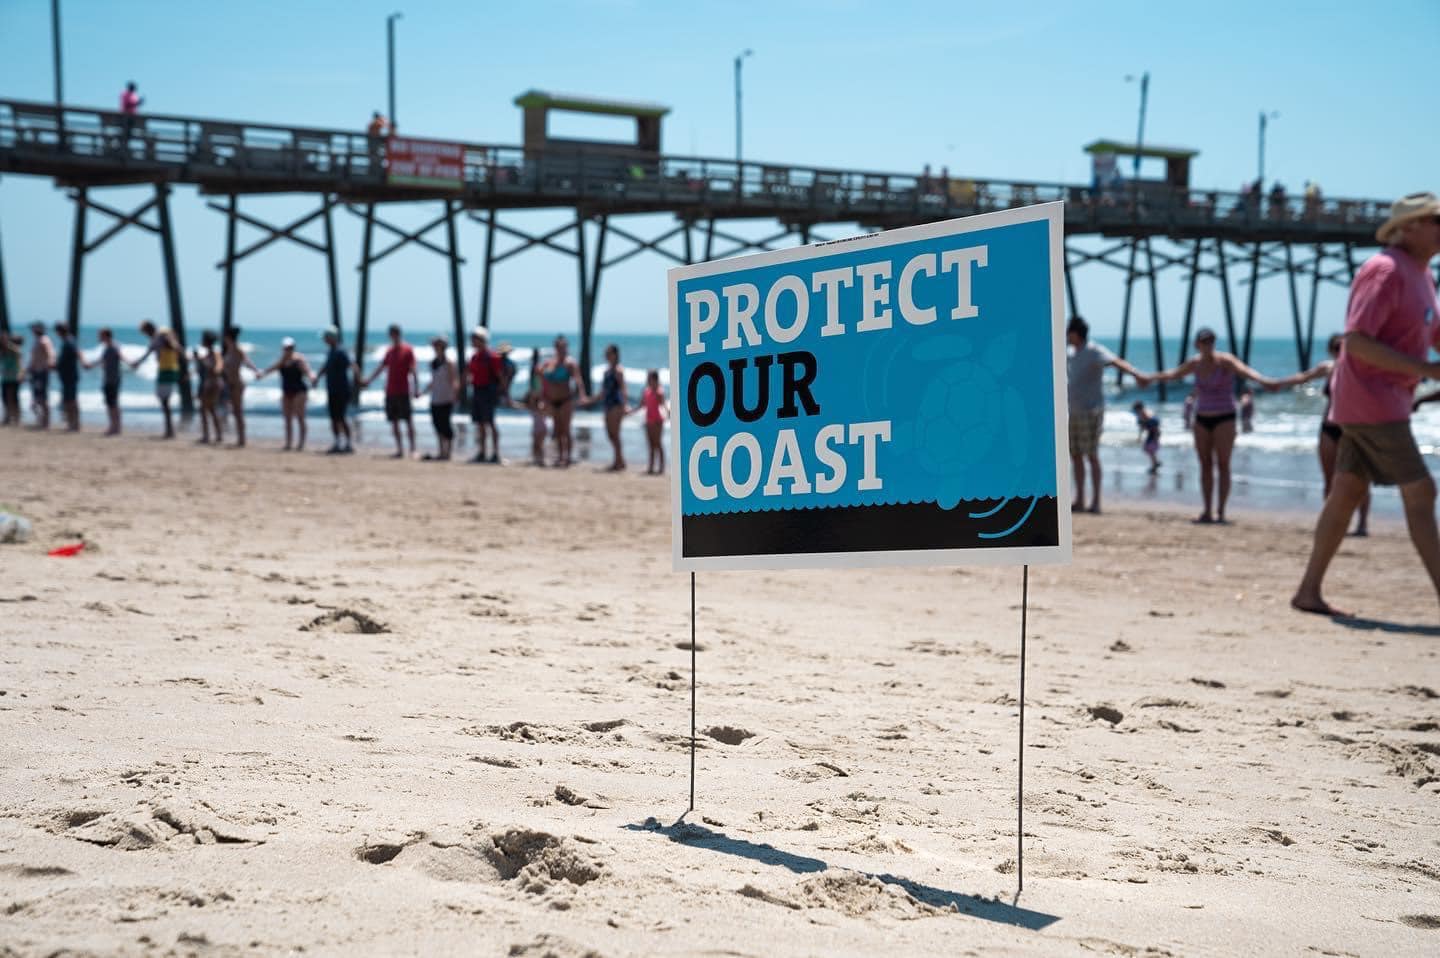 Volunteers hold hands across the sand near a protect your coast sign